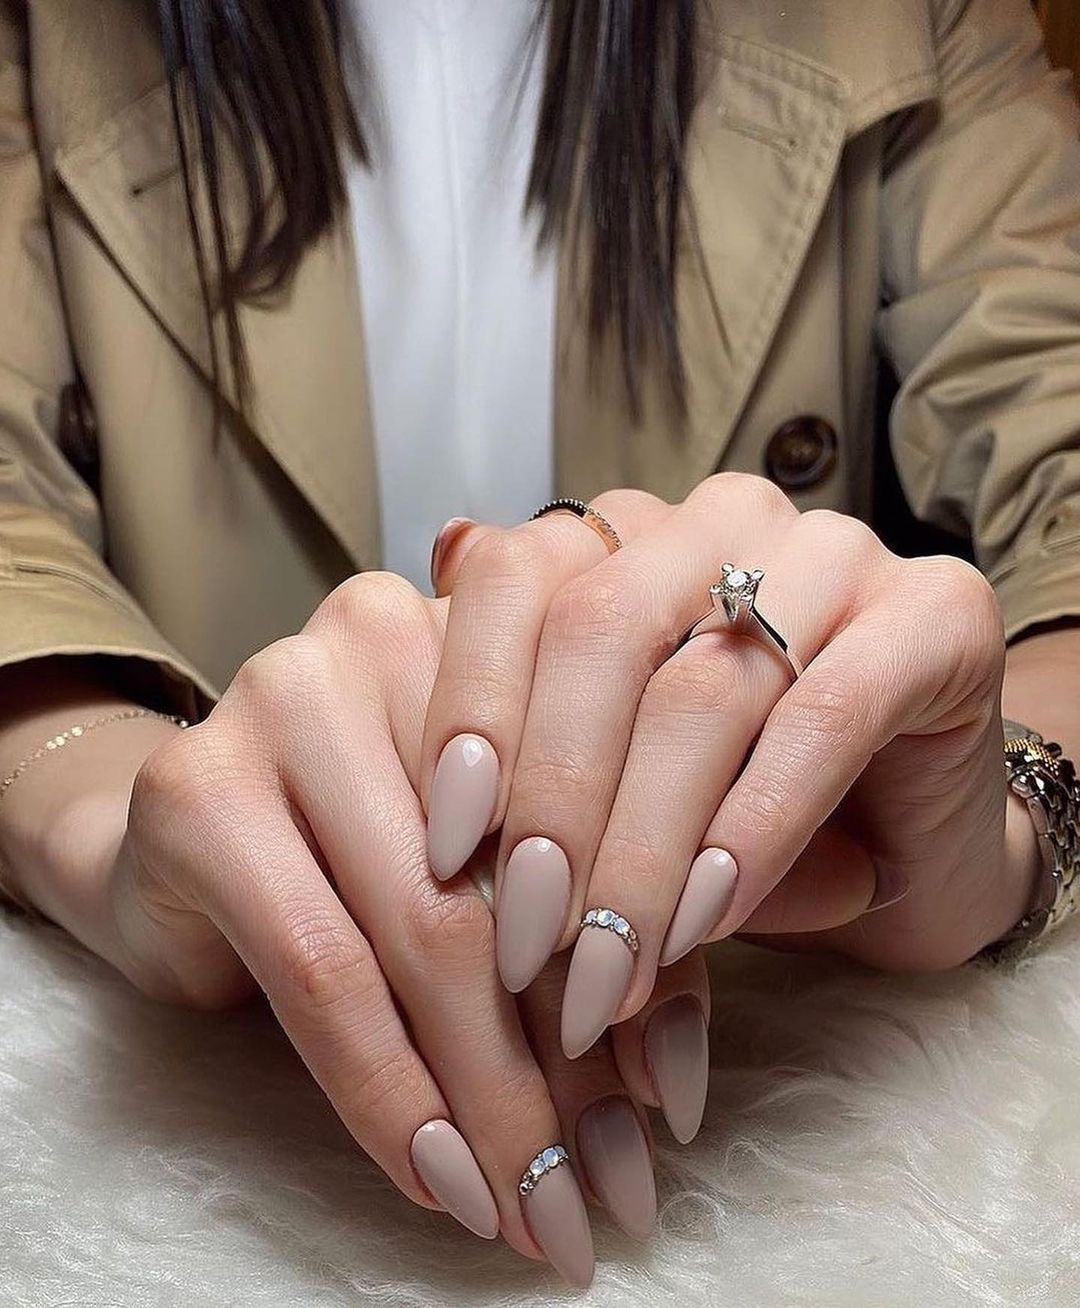 30 Easy Nails & Nail Art Designs To Try In 2022 images 4